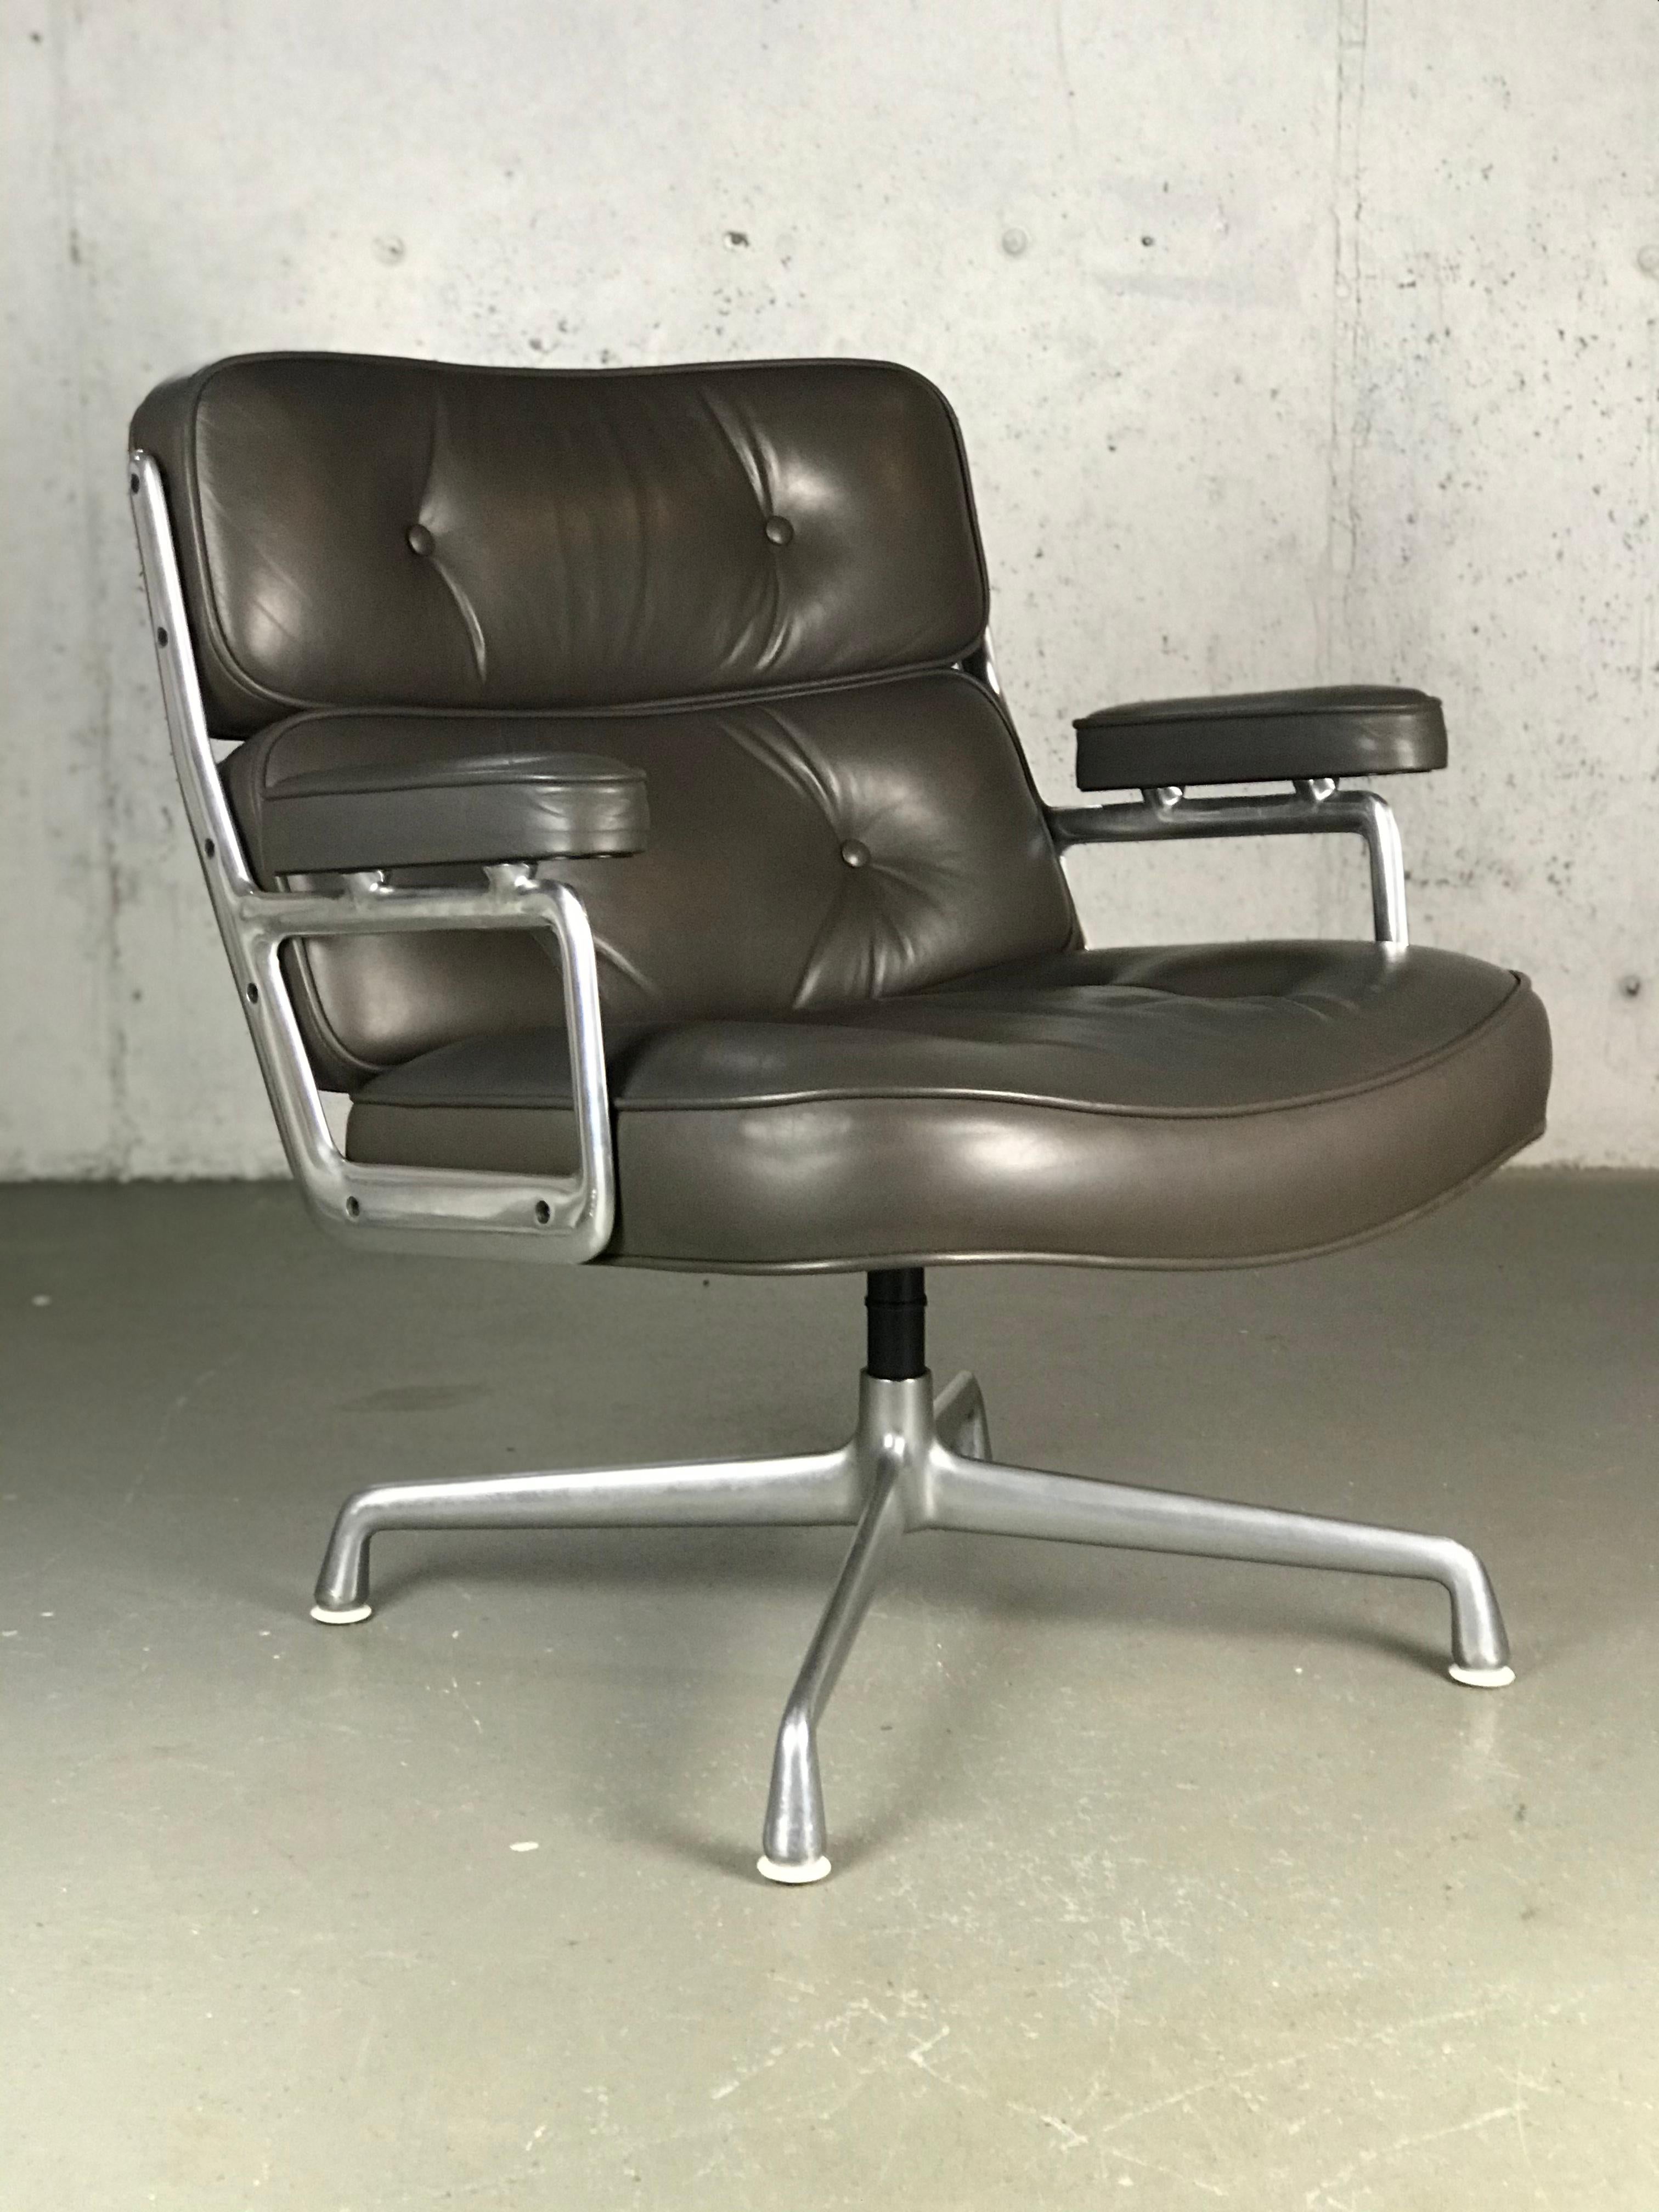 Executive lounge chair by Charles and Ray Eames. Original condition. Original grey leather with a light brown hue. The aluminum frame has wear/abrasions - leather has some wear as well. Indintation in the top. Faint crease along the top of the back